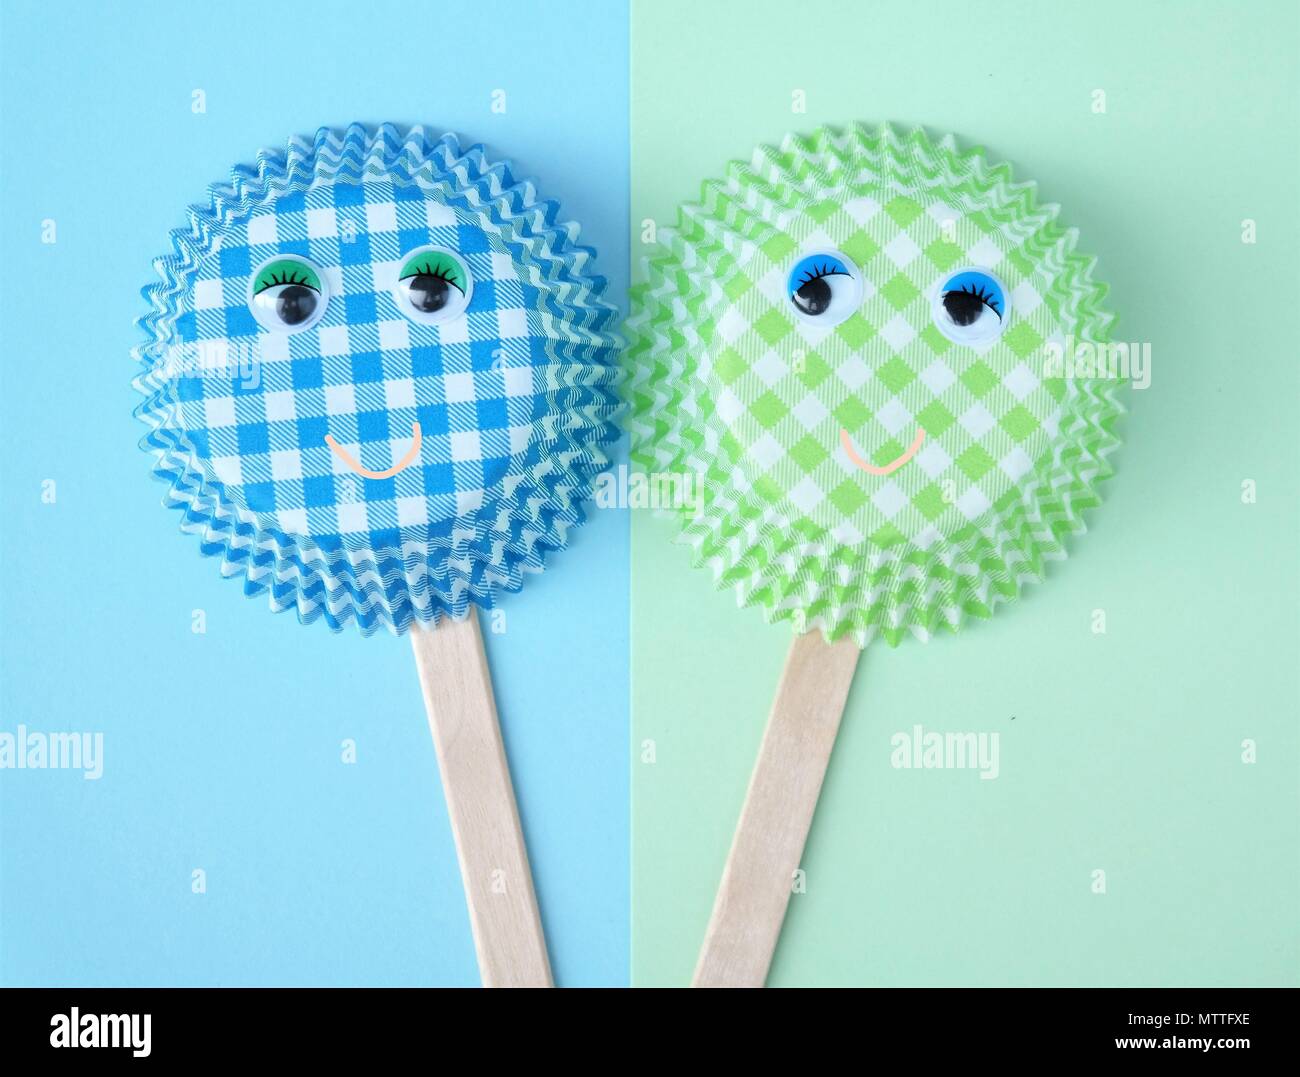 two cupcake molds with wobbly eyes, ice popsicle sticks en smiling faces. simple baking concept in green and blue colors. Funny creative image Stock Photo